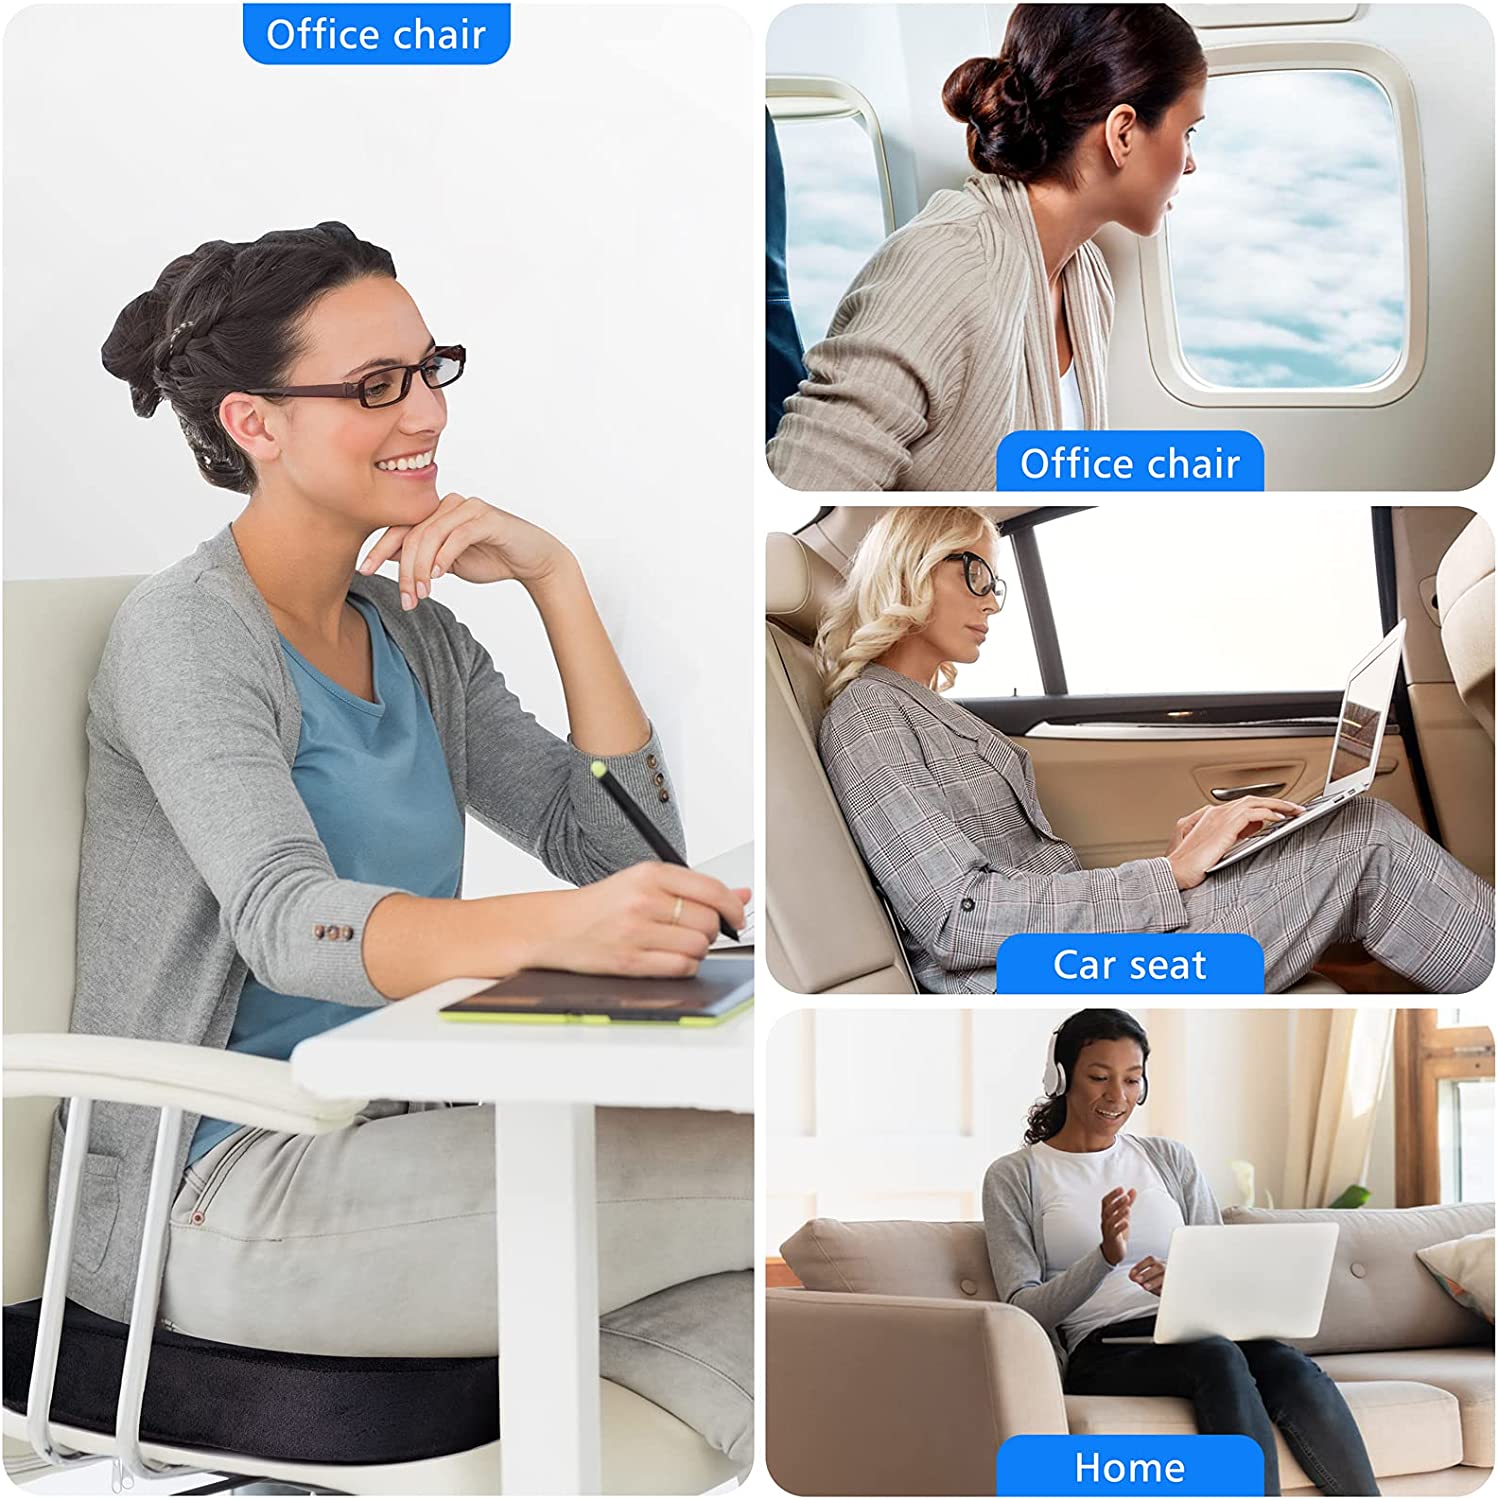 https://discounttoday.net/wp-content/uploads/2022/09/WAOAW-Seat-Cushion-Office-Chair-Cushions-Butt-Pillow-for-Long-Sitting-Memory-Foam-Chair-Pad-for-Back-Coccyx-Tailbone-Pain-Relief5.jpg